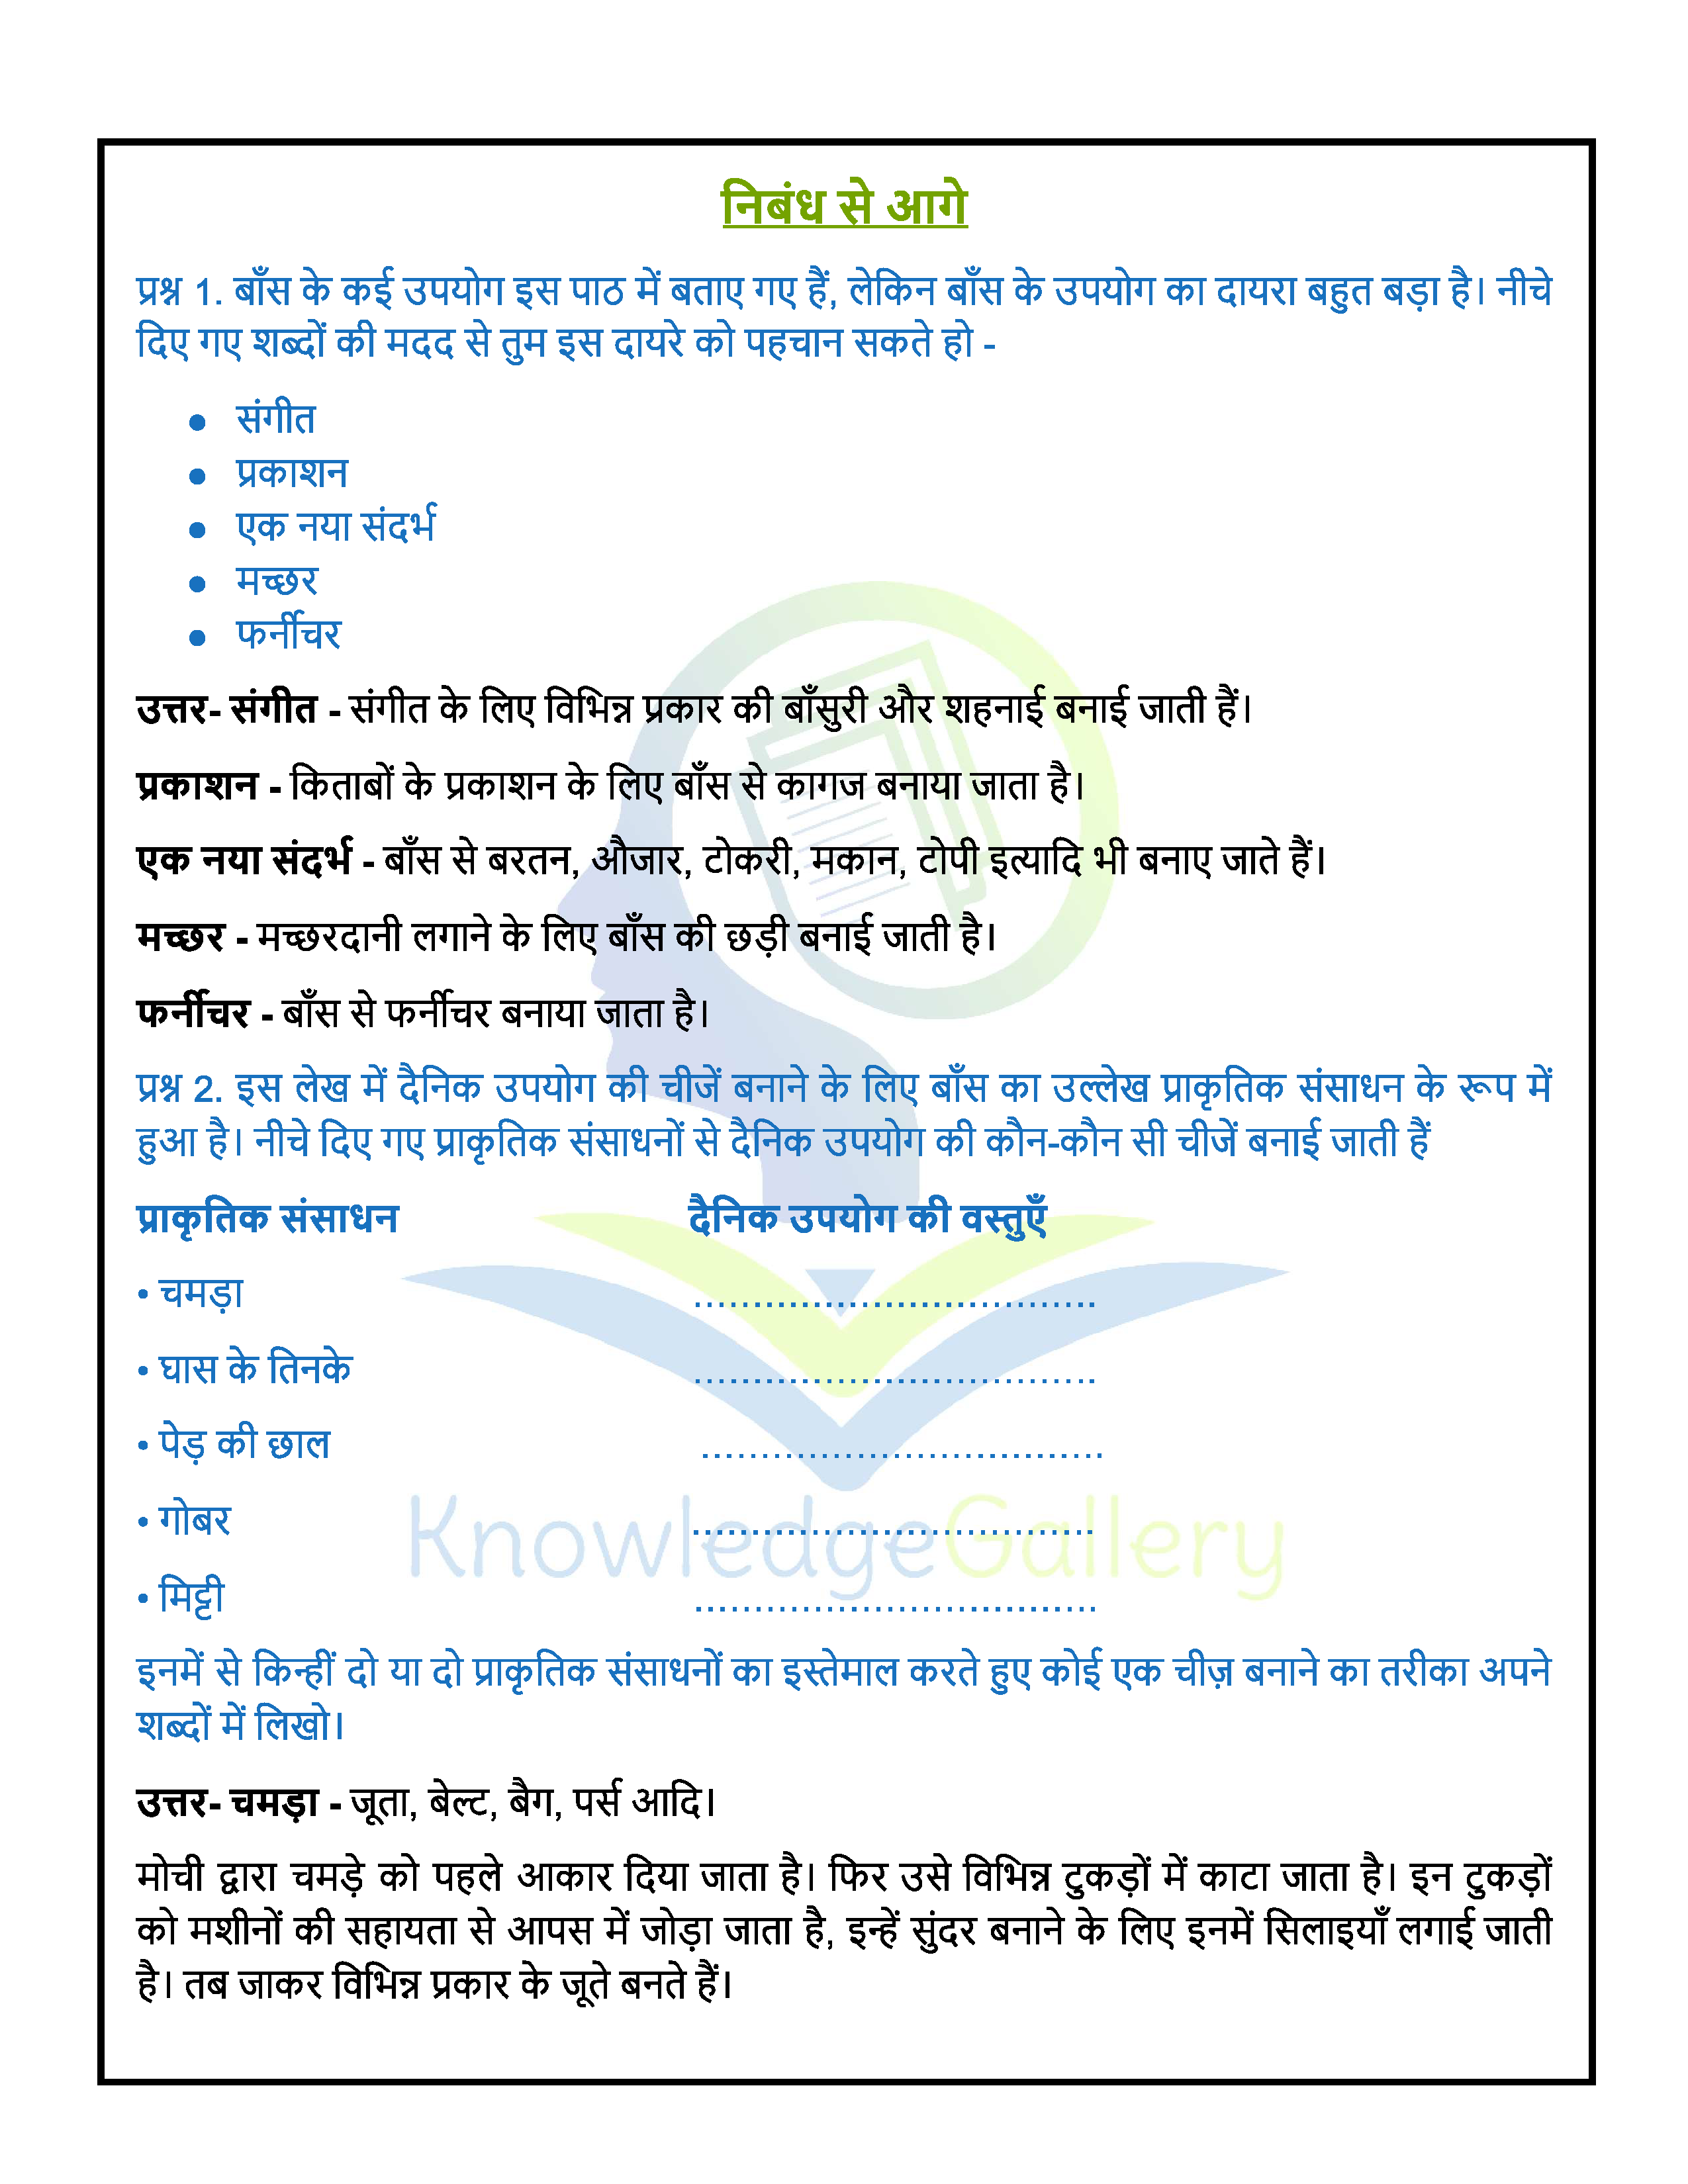 NCERT Solution For Class 6 Hindi Chapter 17 part 2